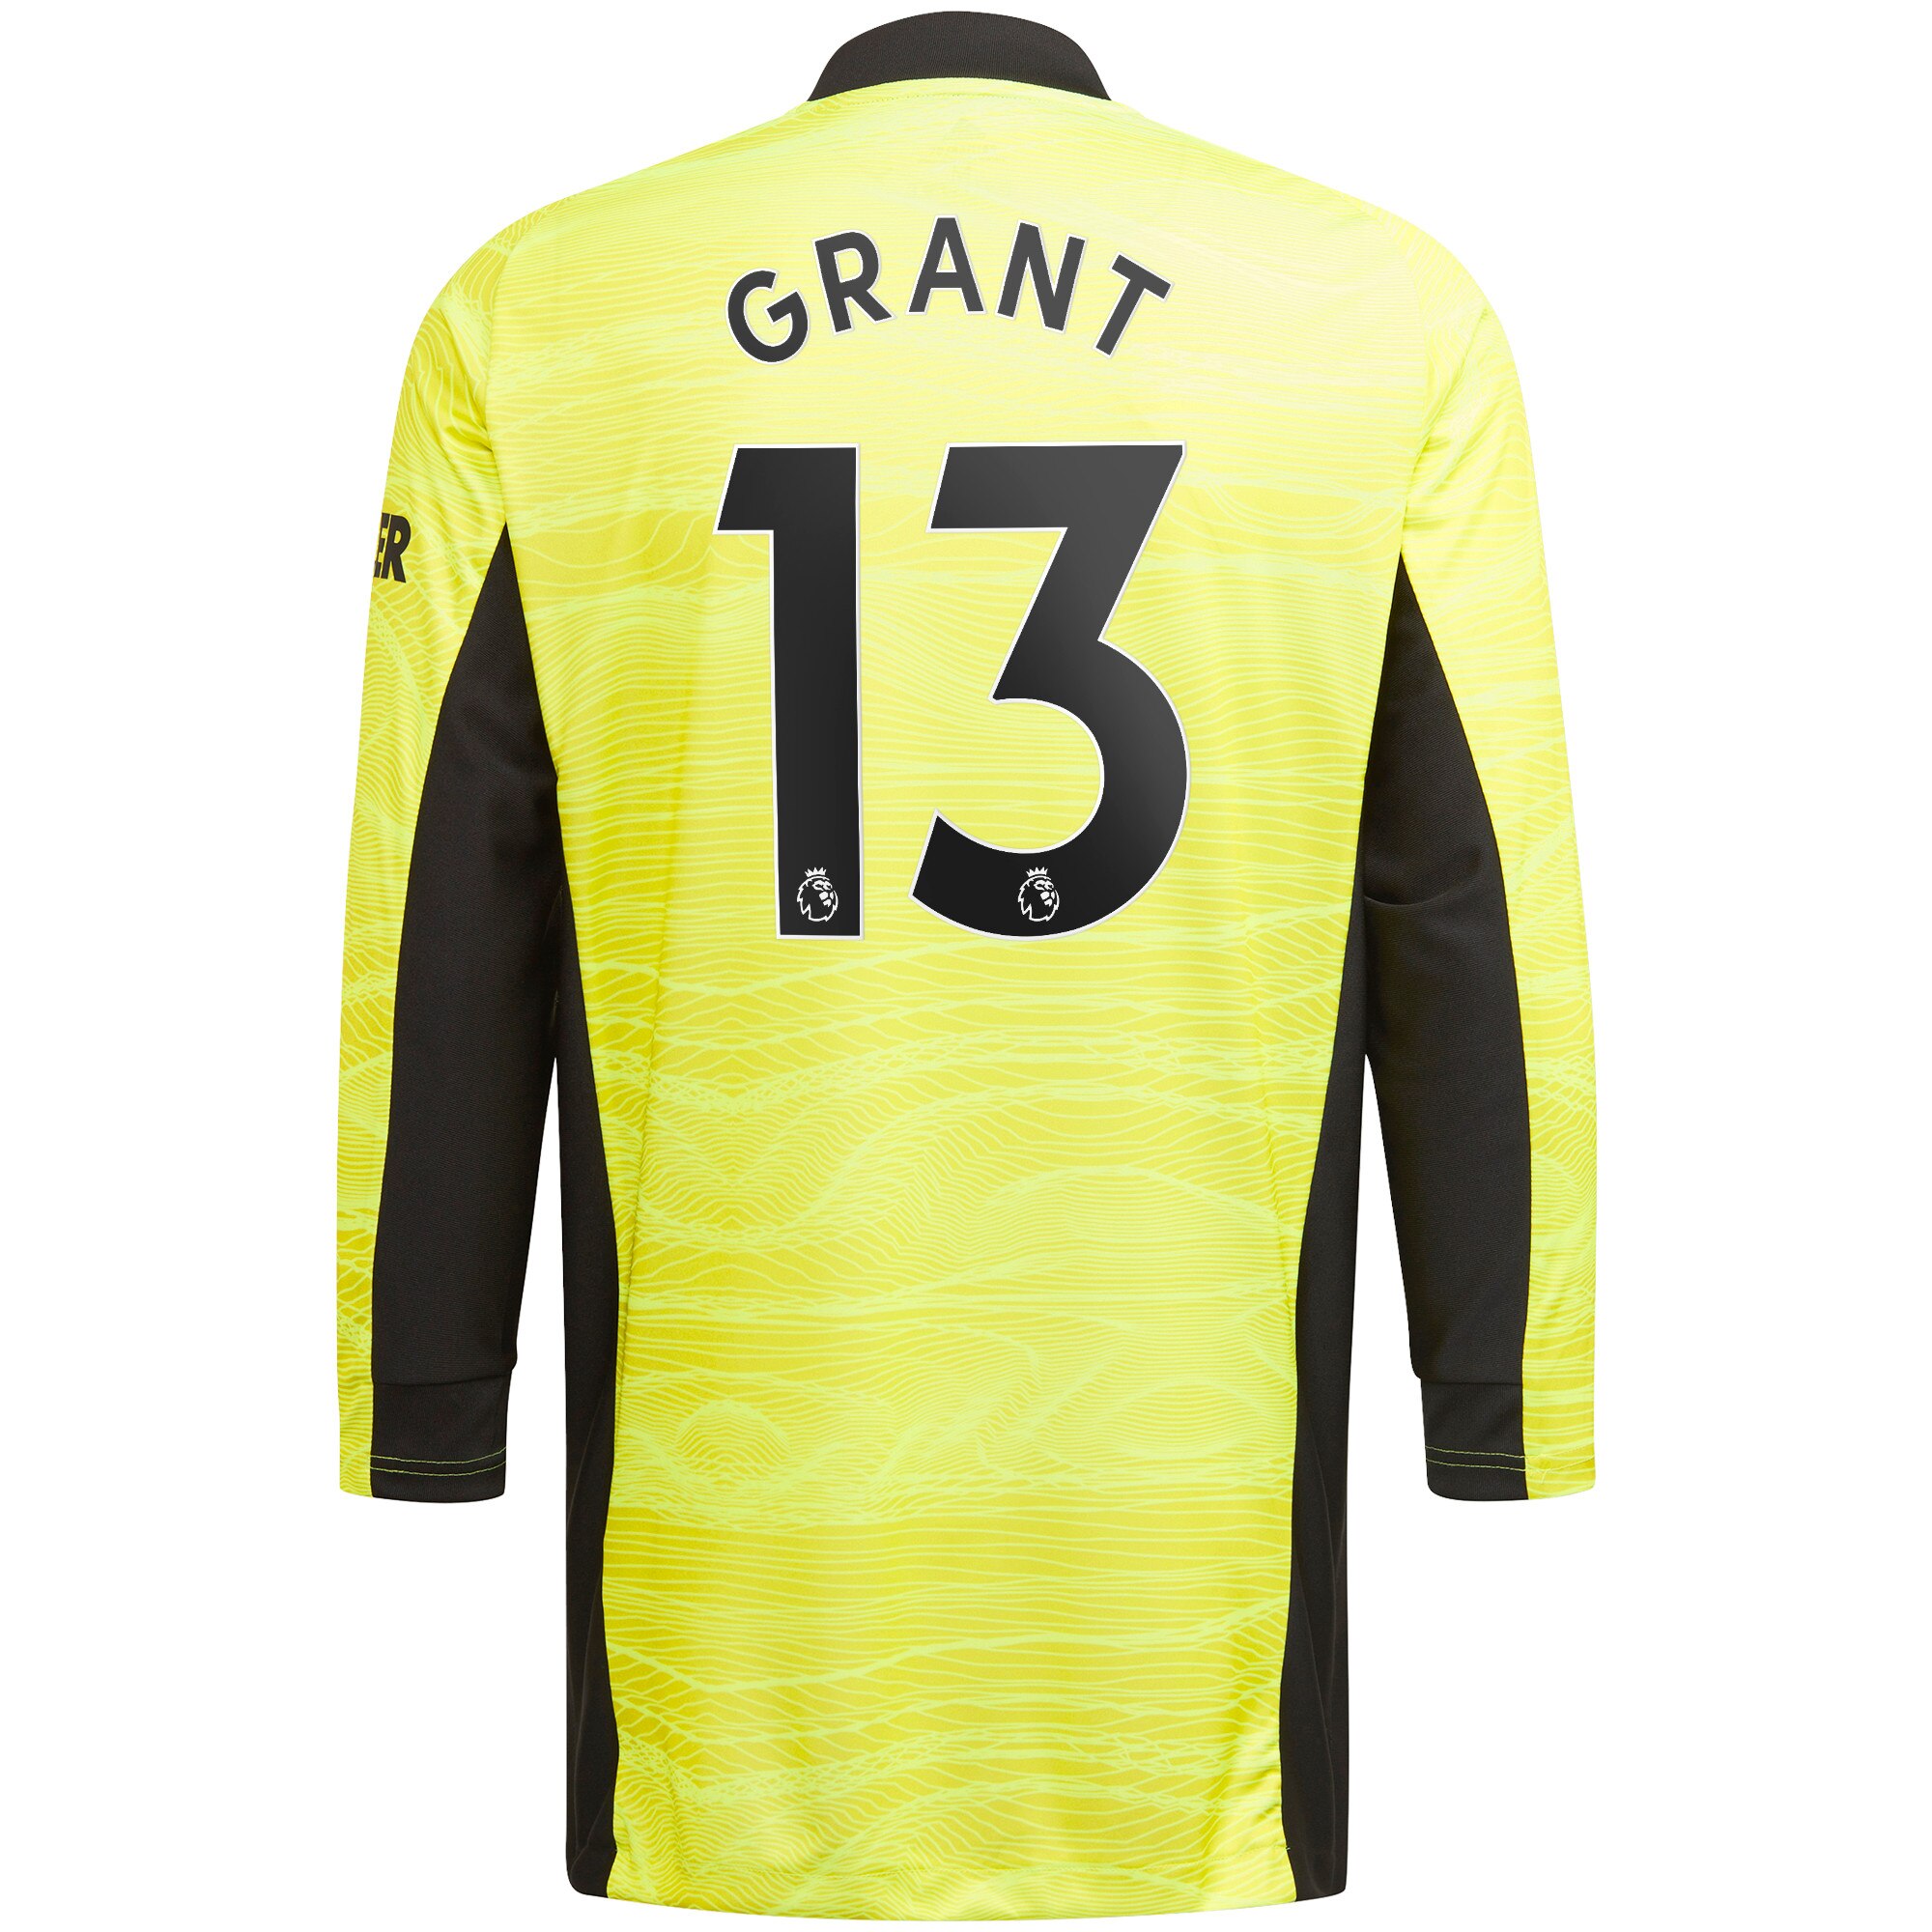 Manchester United Home Goalkeeper Shirt 2021-22 with Grant 13 printing